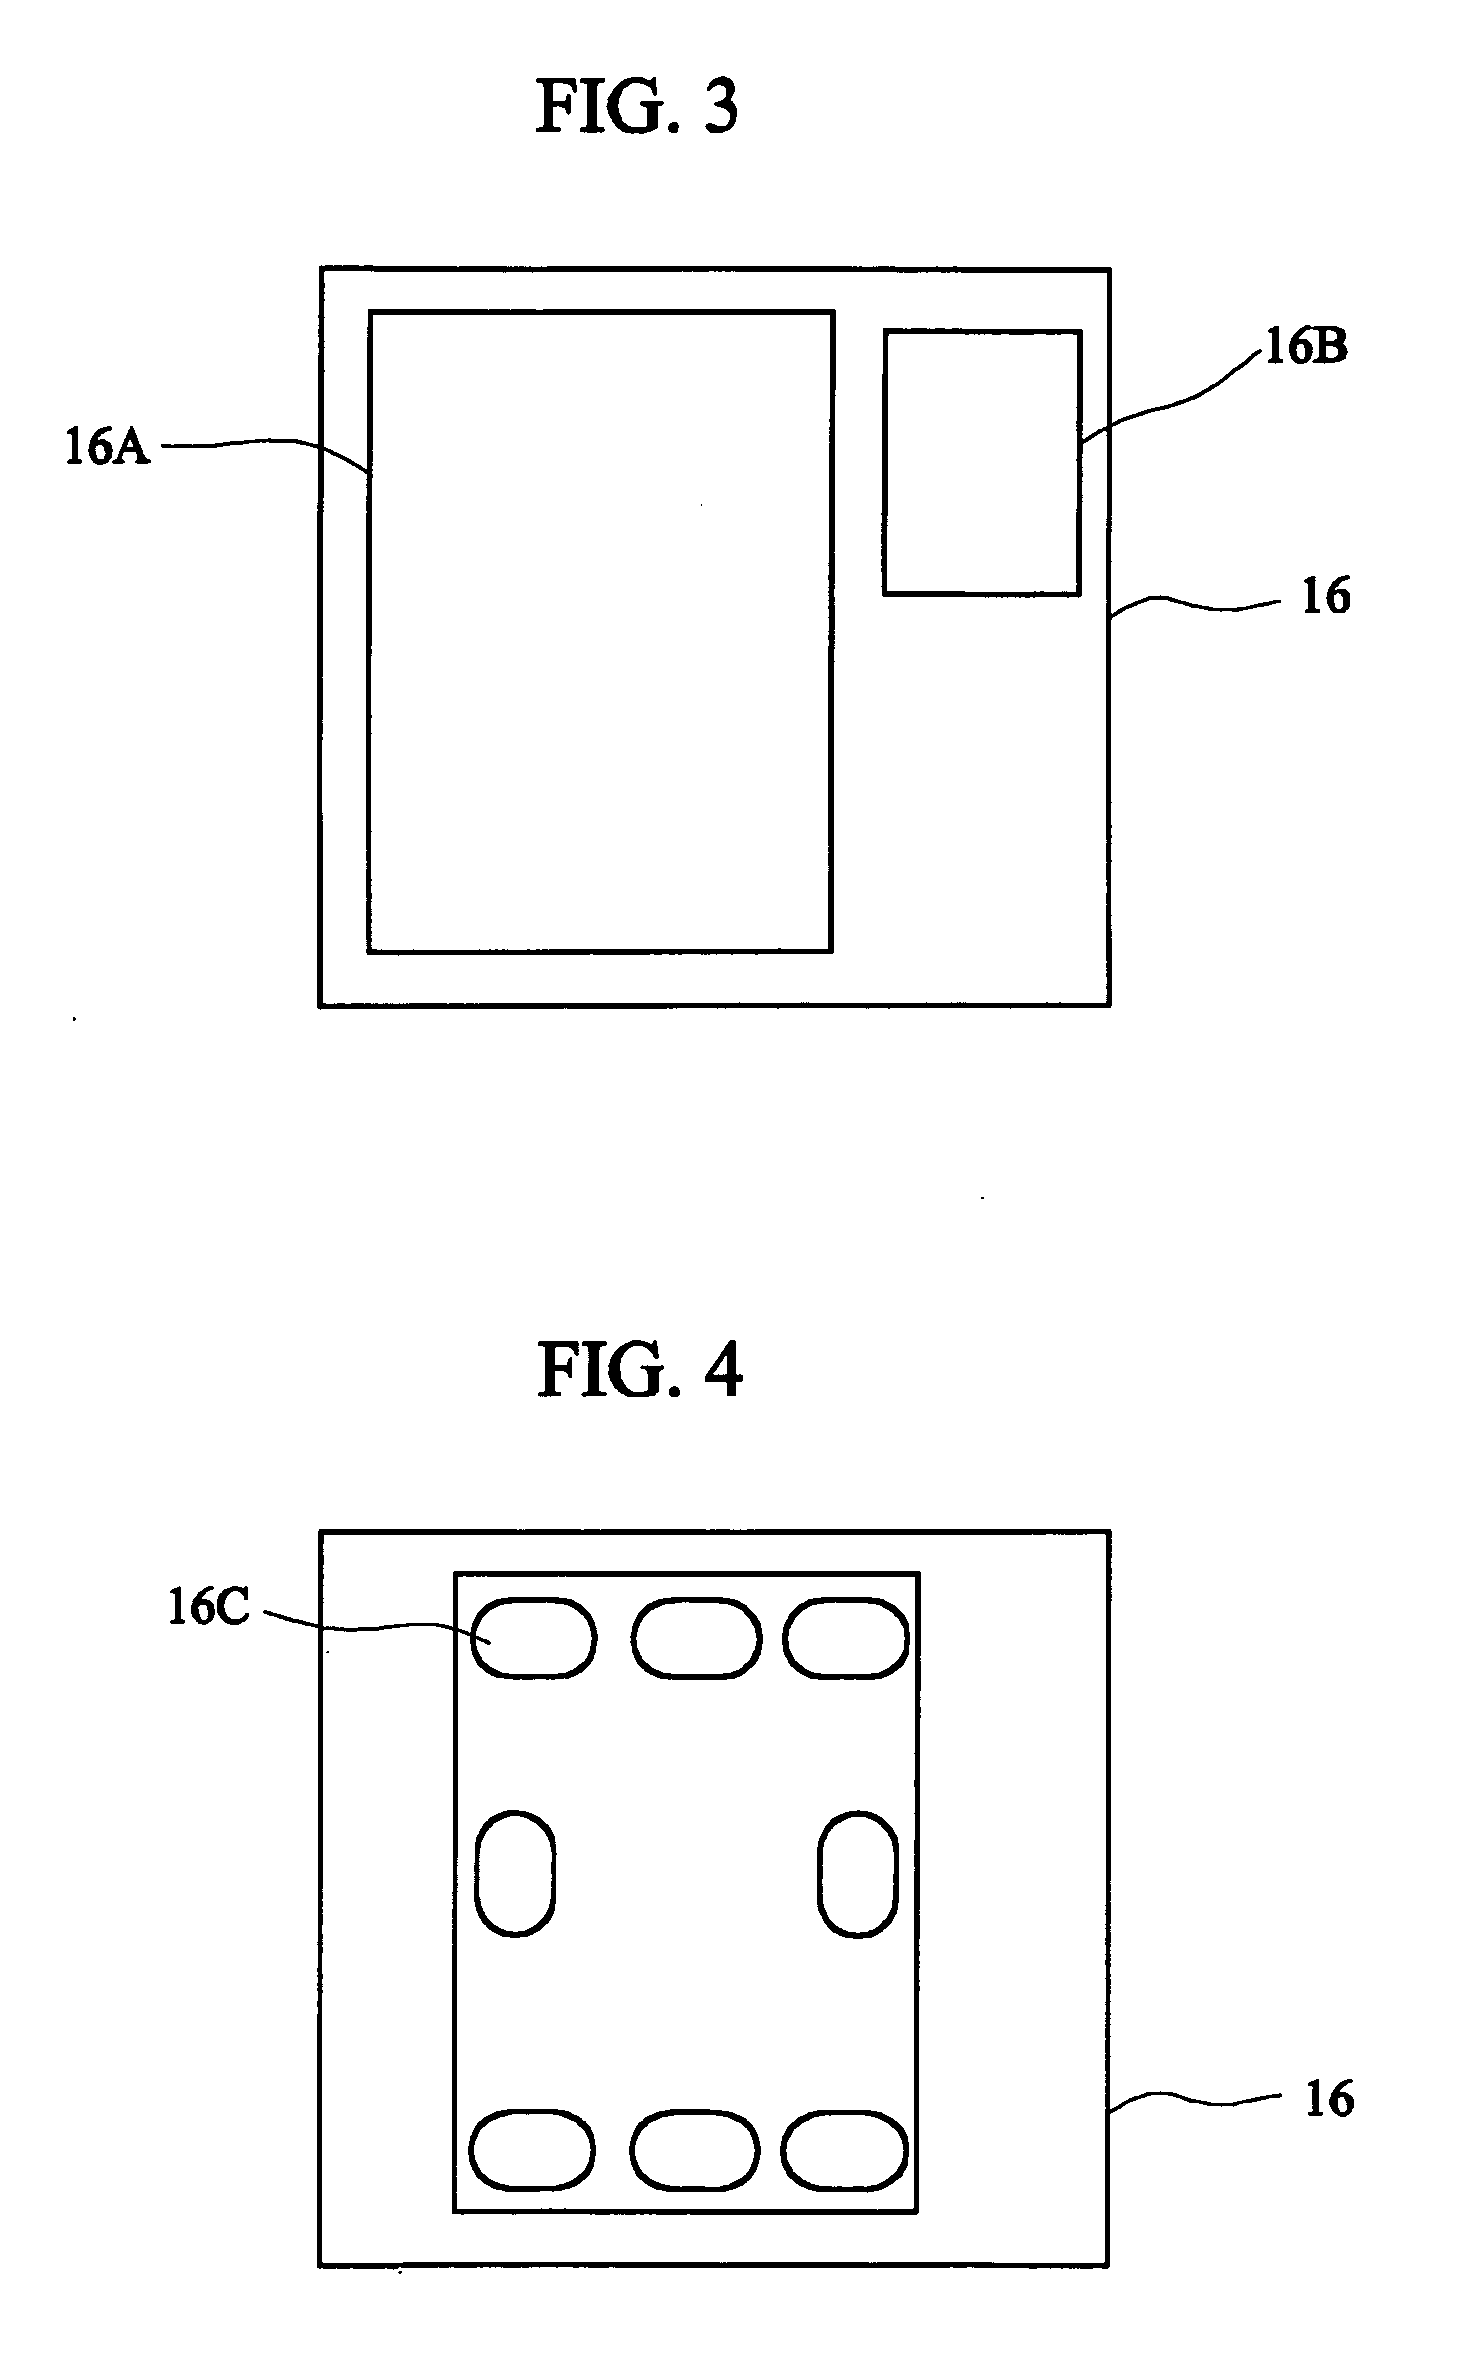 Image acquiring device and method or rotating images